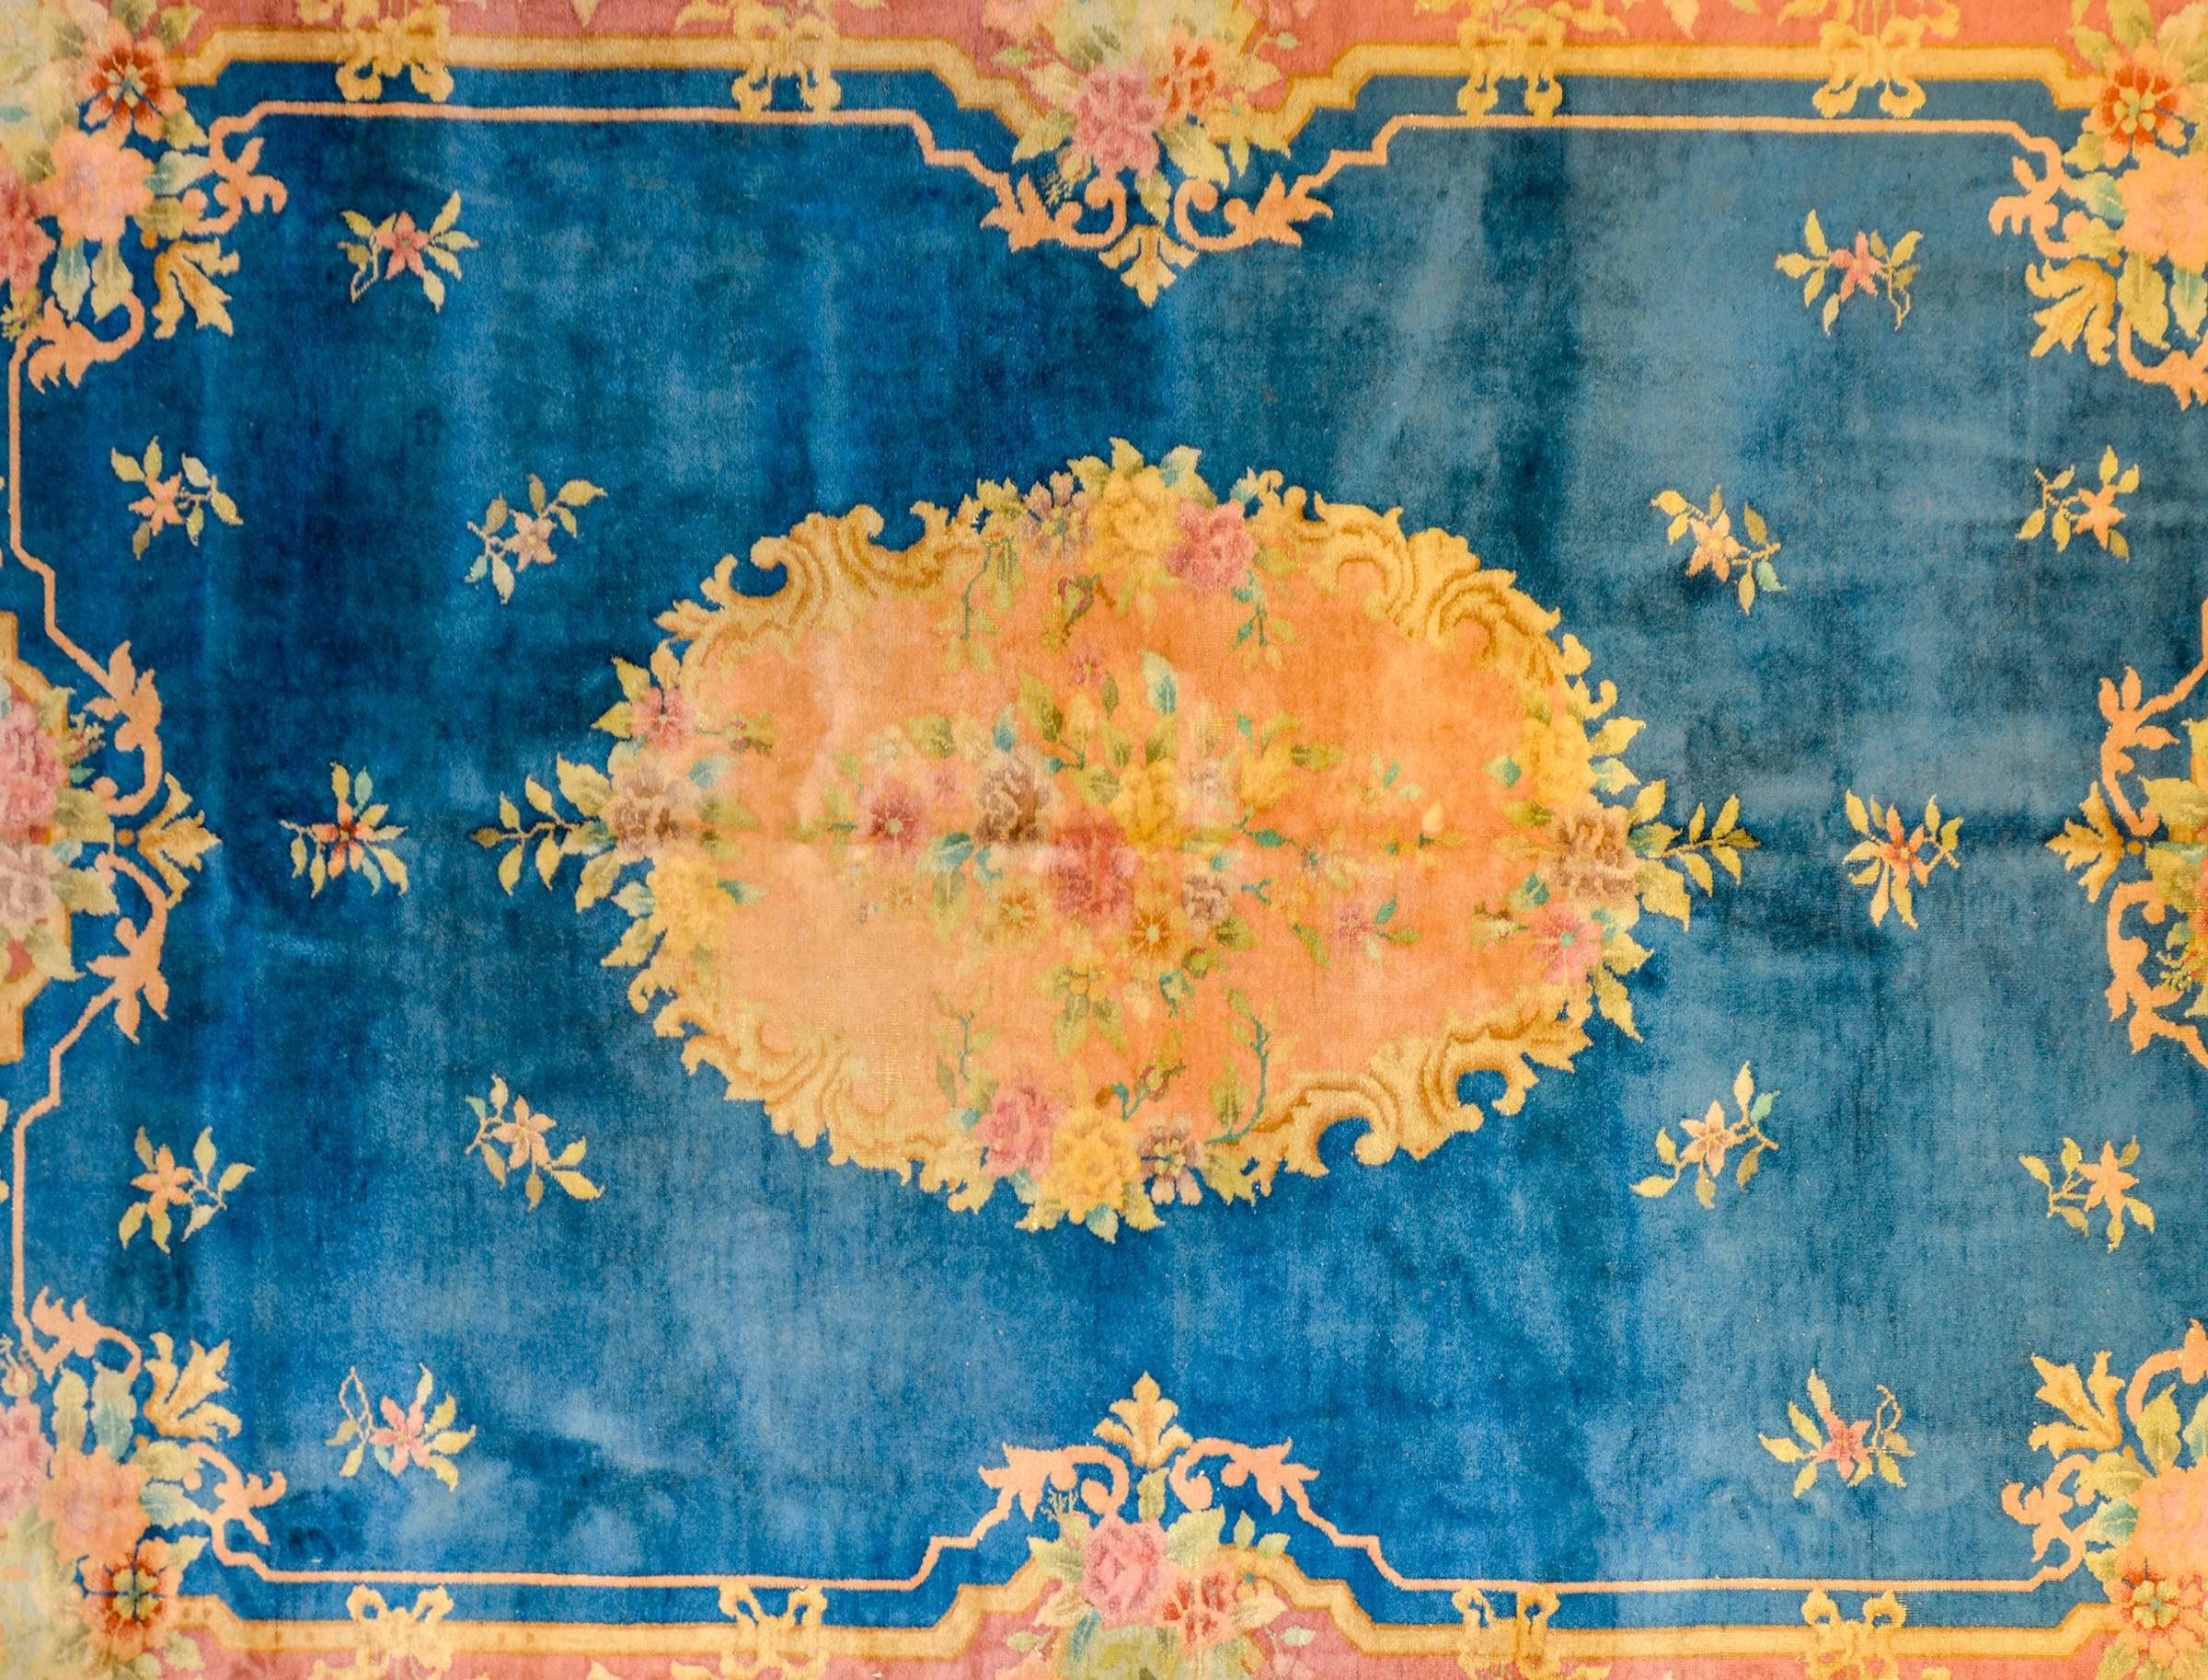 An unusual Chinese Art Deco rug with a French inspired design with a gold, rose, and violet Baroque styled floral medallion on a deep indigo field surrounded by a matching Baroque border with similar floral pattern.